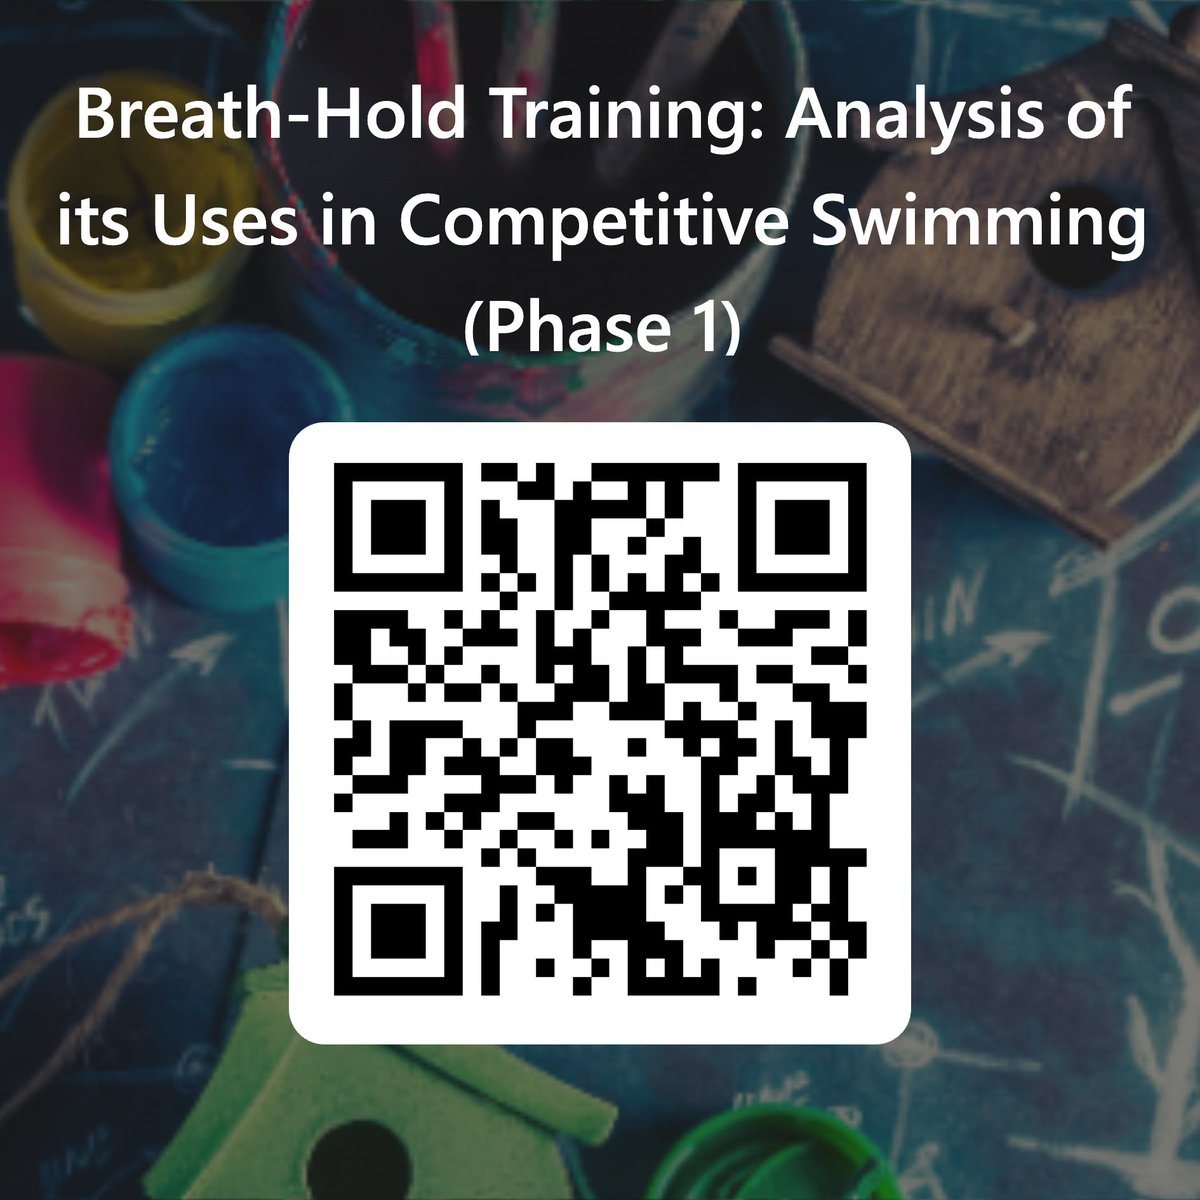 🚨Swimming Coaches🚨 Could you take 5-10 minutes to fill in our Survey on the Current Practices for Breath-Hold Training. Your responses will help shape current best practices whilst prioritising the safety of our athletes. Closes Midnight 3rd November forms.office.com/e/kFVsugy7KW